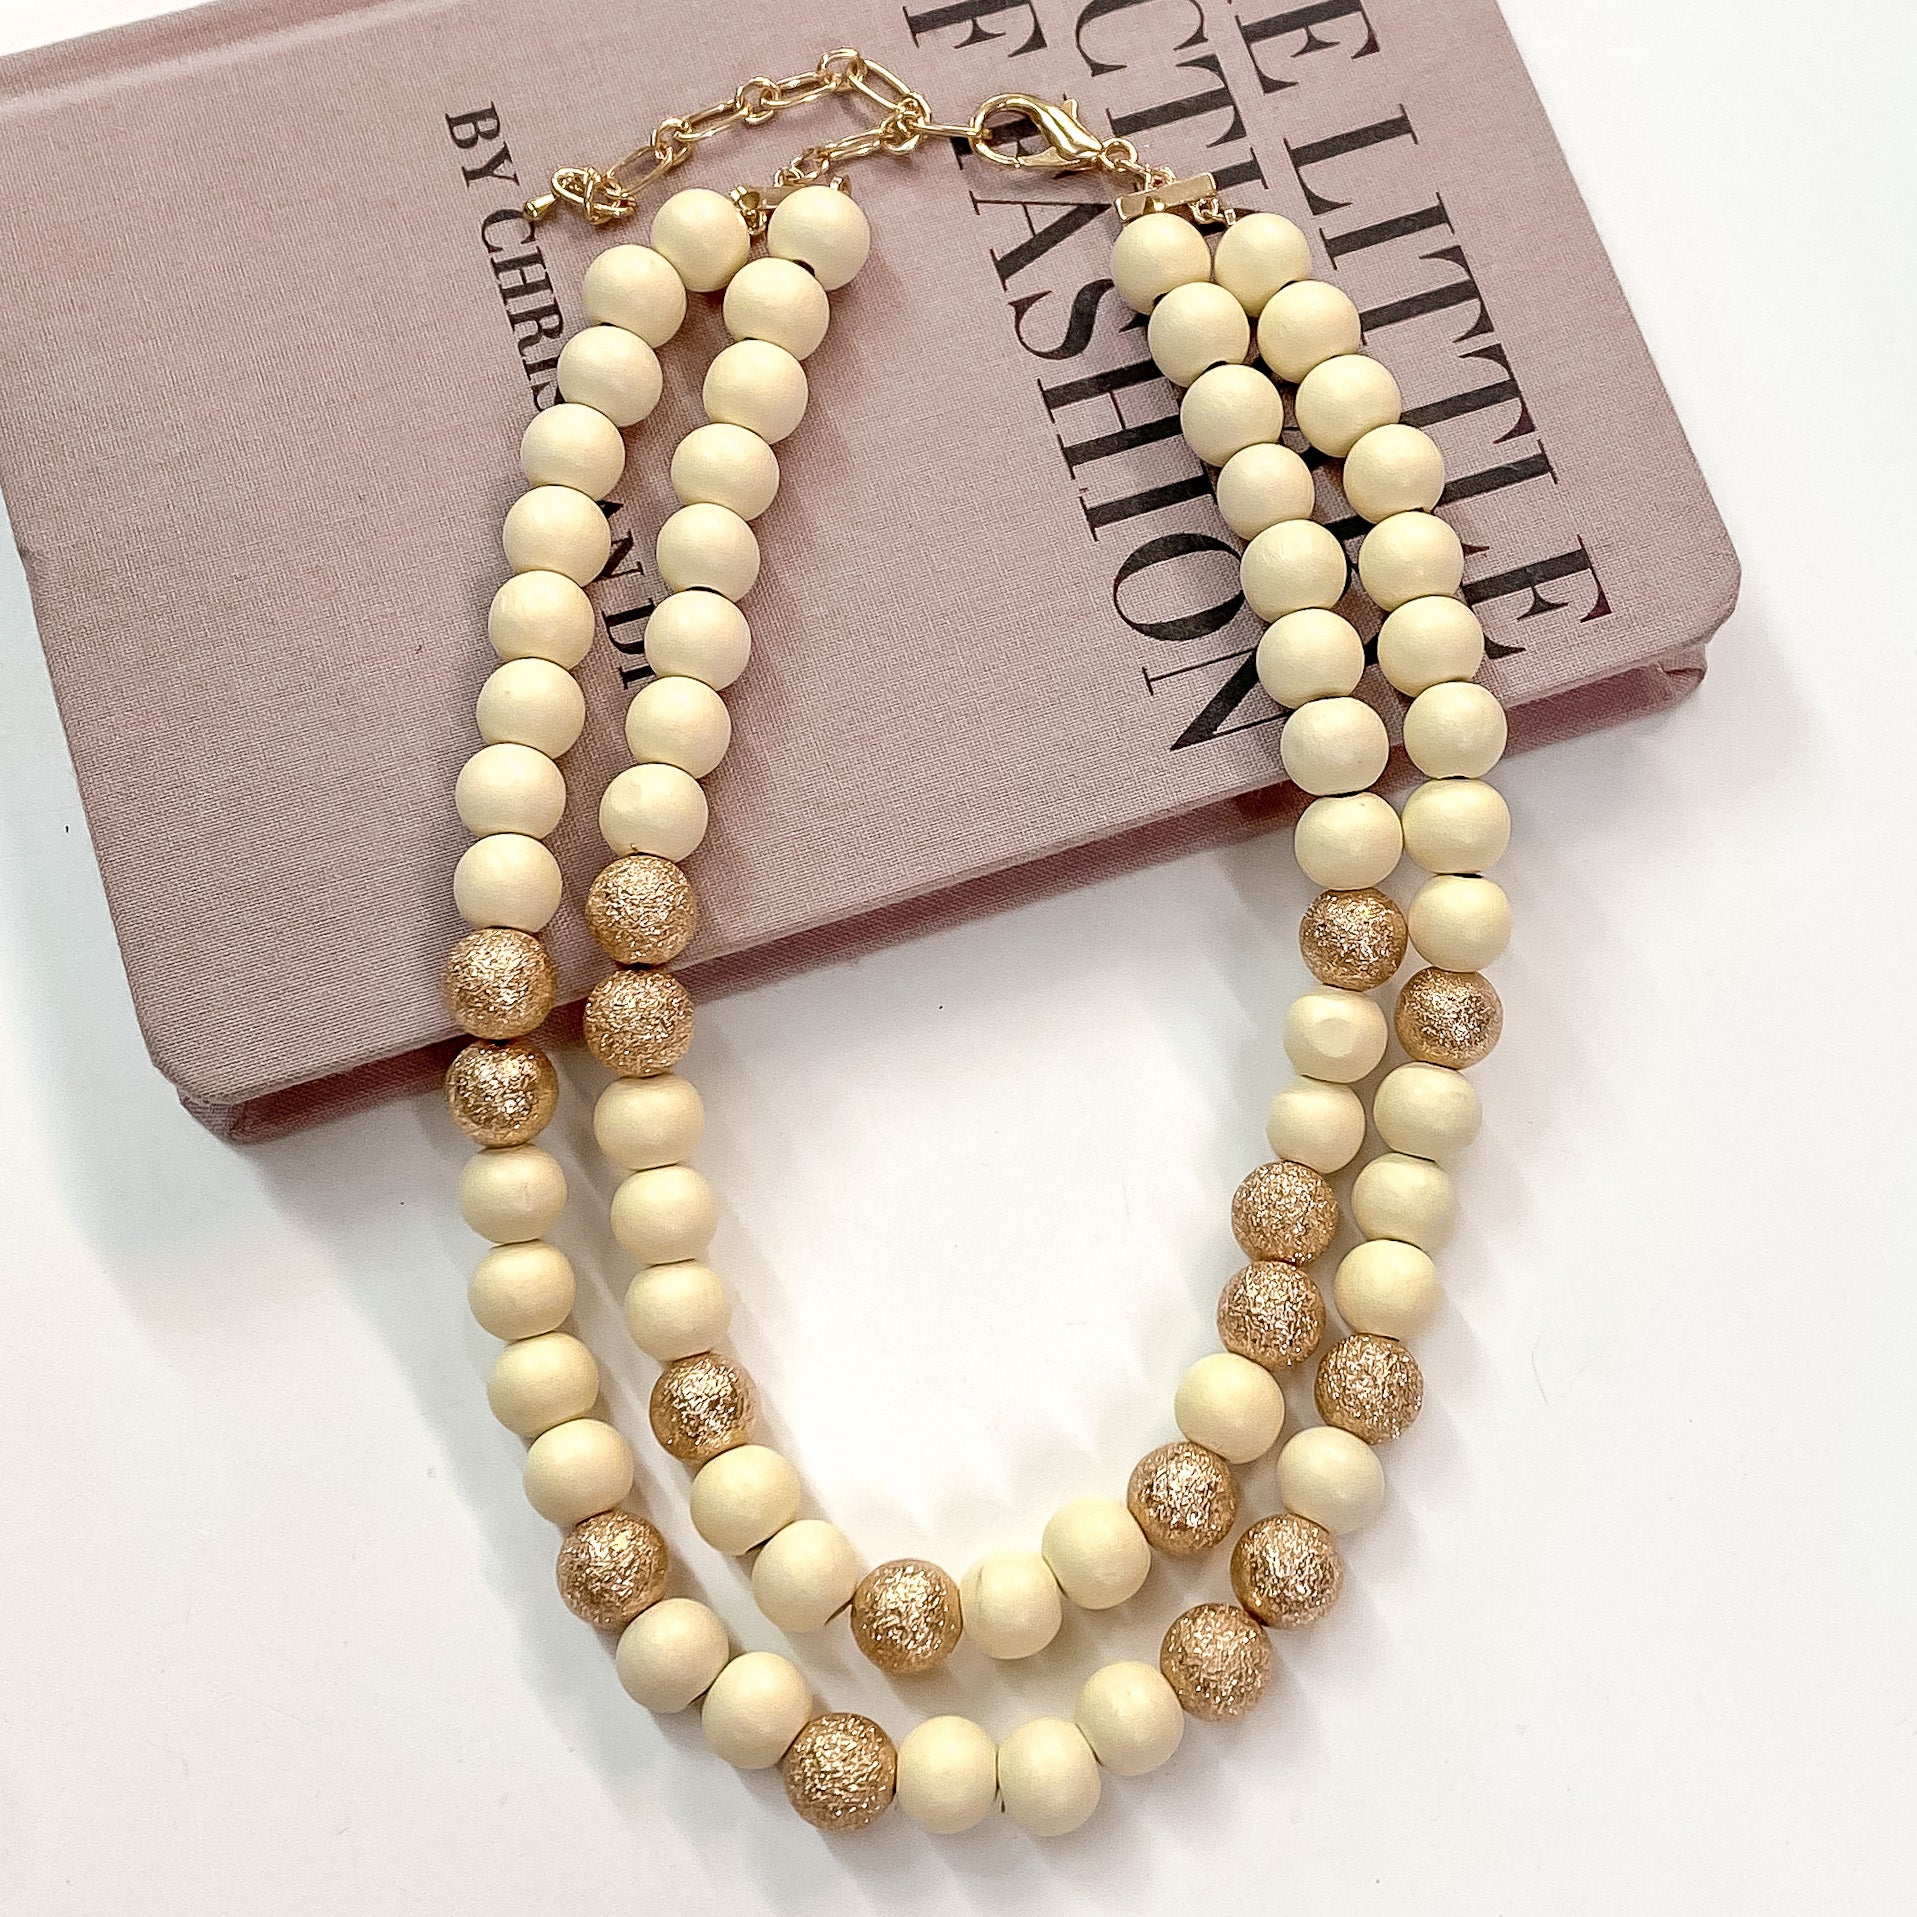 Pictured partially on a mauve colored book on a white background is a two strand ivory beaded necklace with gold beaded spacers and gold hardware. 